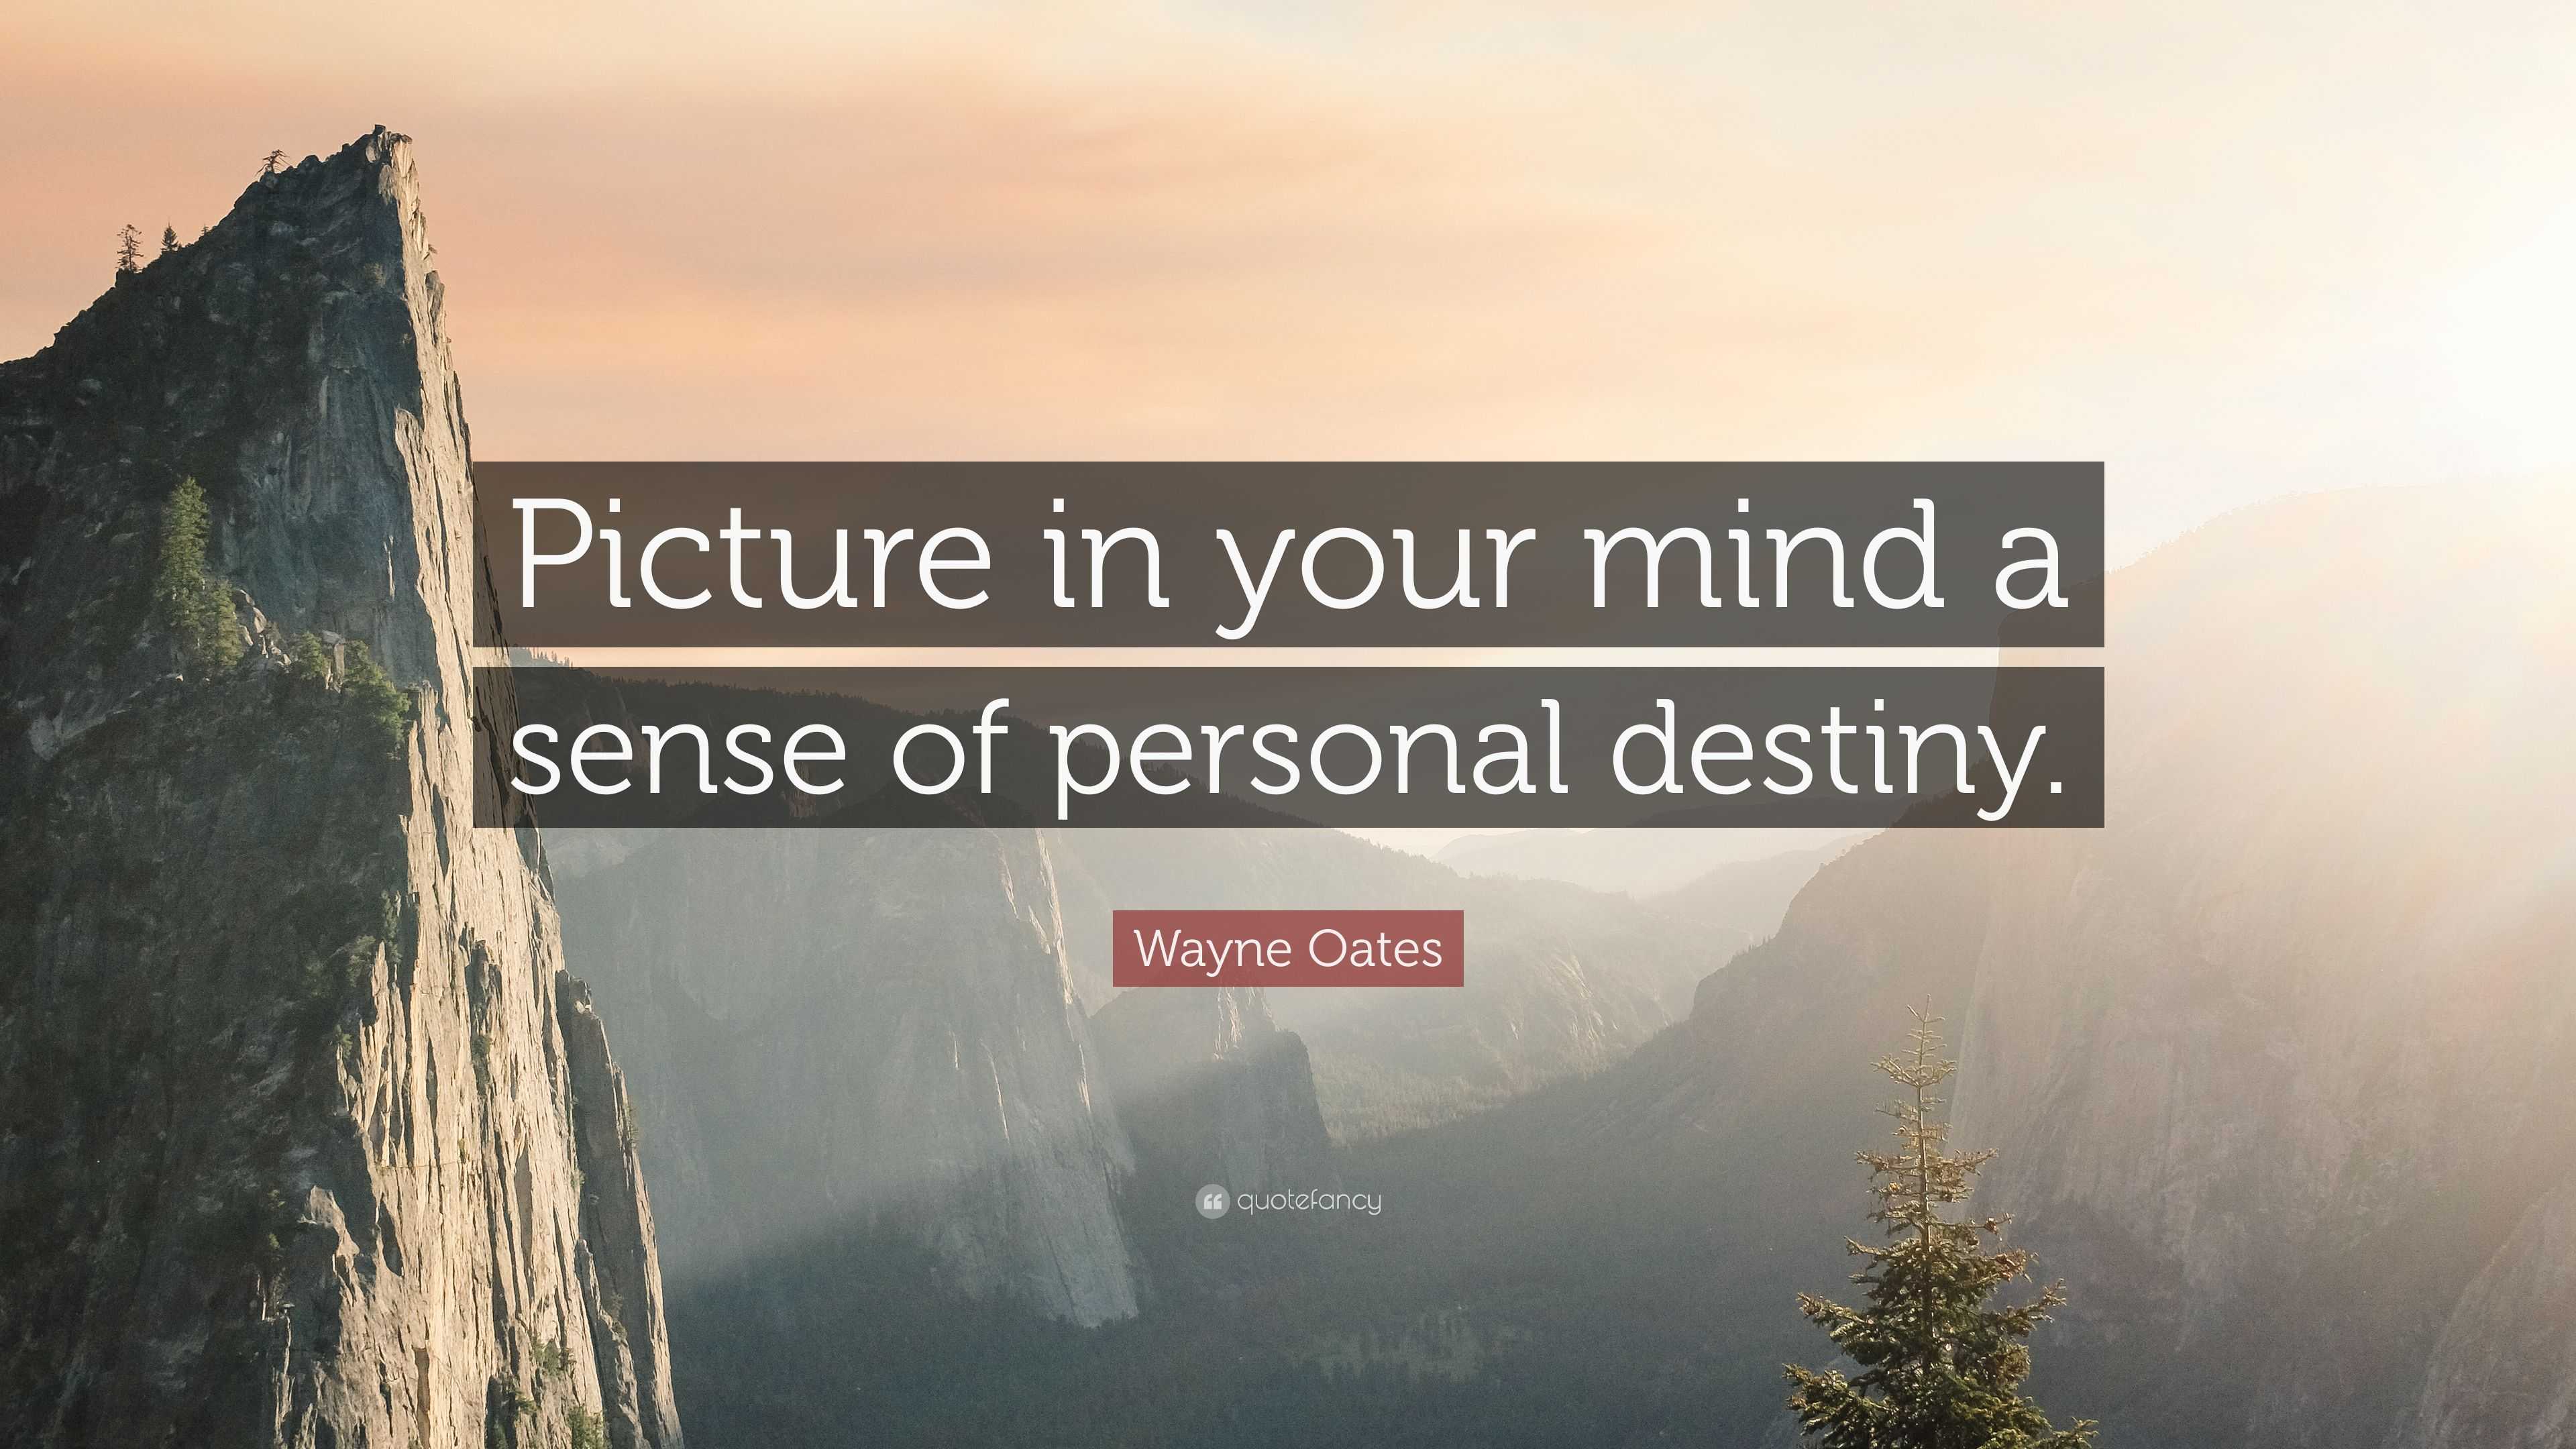 Wayne Oates Quote “picture In Your Mind A Sense Of Personal Destiny”